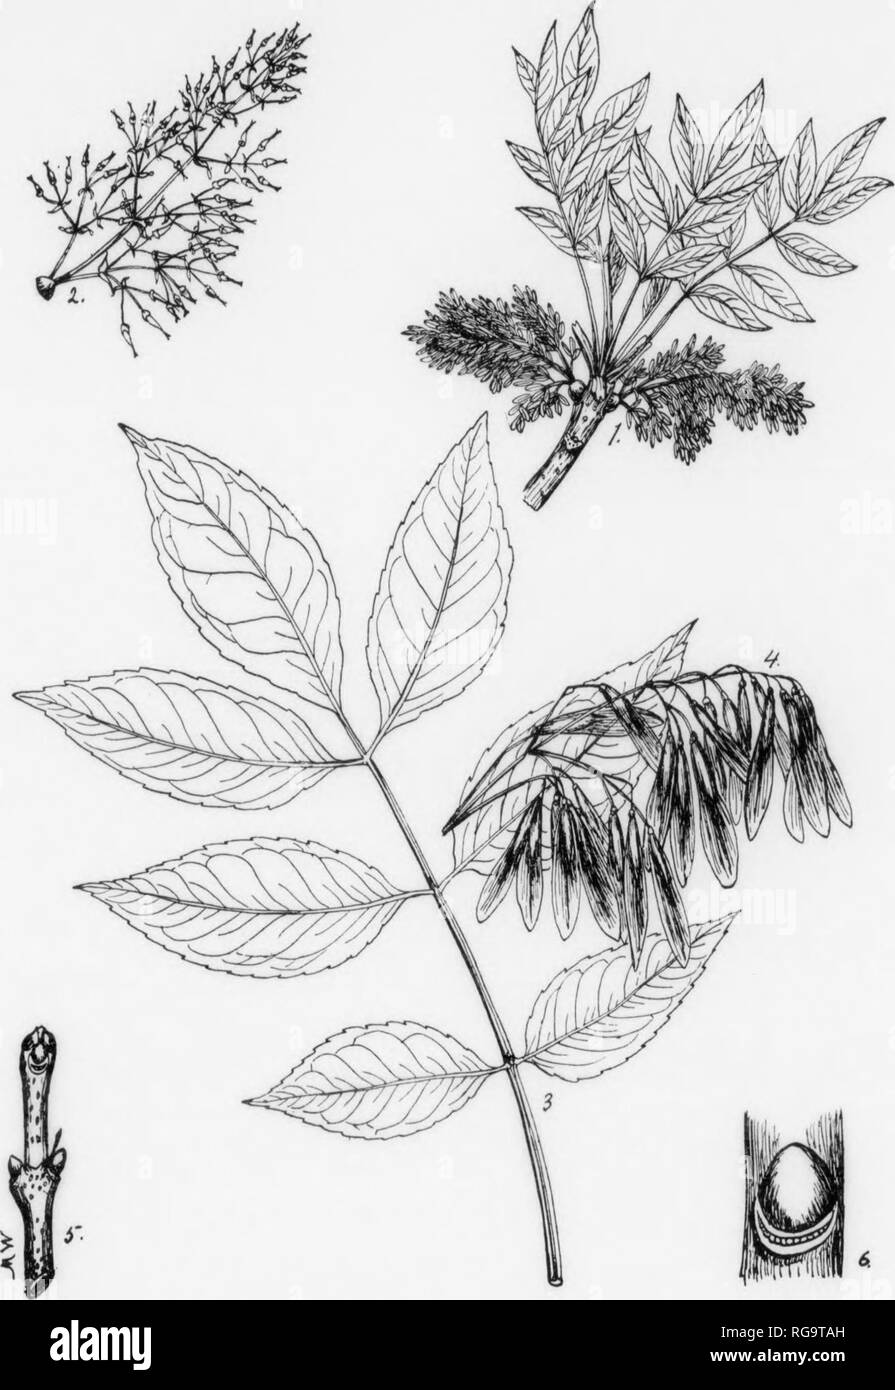 . Bulletin (Pennsylvania Department of Forestry), no. 11. Forests and forestry. 220 WHITE ASH Fraxinus americana, Linnaeus FOEM—Usually reaches a ickM of 70-SO ft. with a diameter of 2-3 ft. but may attain a height of 120 ft. with a diaim&gt;ter of .5-0 ft. Trunk usually tall, massive, clear of branches for a considerable distance from the {jround when grown in thfe forest, bearing a nnirow, some- what pyramidal crown. When onen-grown the crown is decidedly round-topped and often extends almost to the ground. In forest-grown trees tnmk often continuous and dividing into a number of spreading Stock Photo